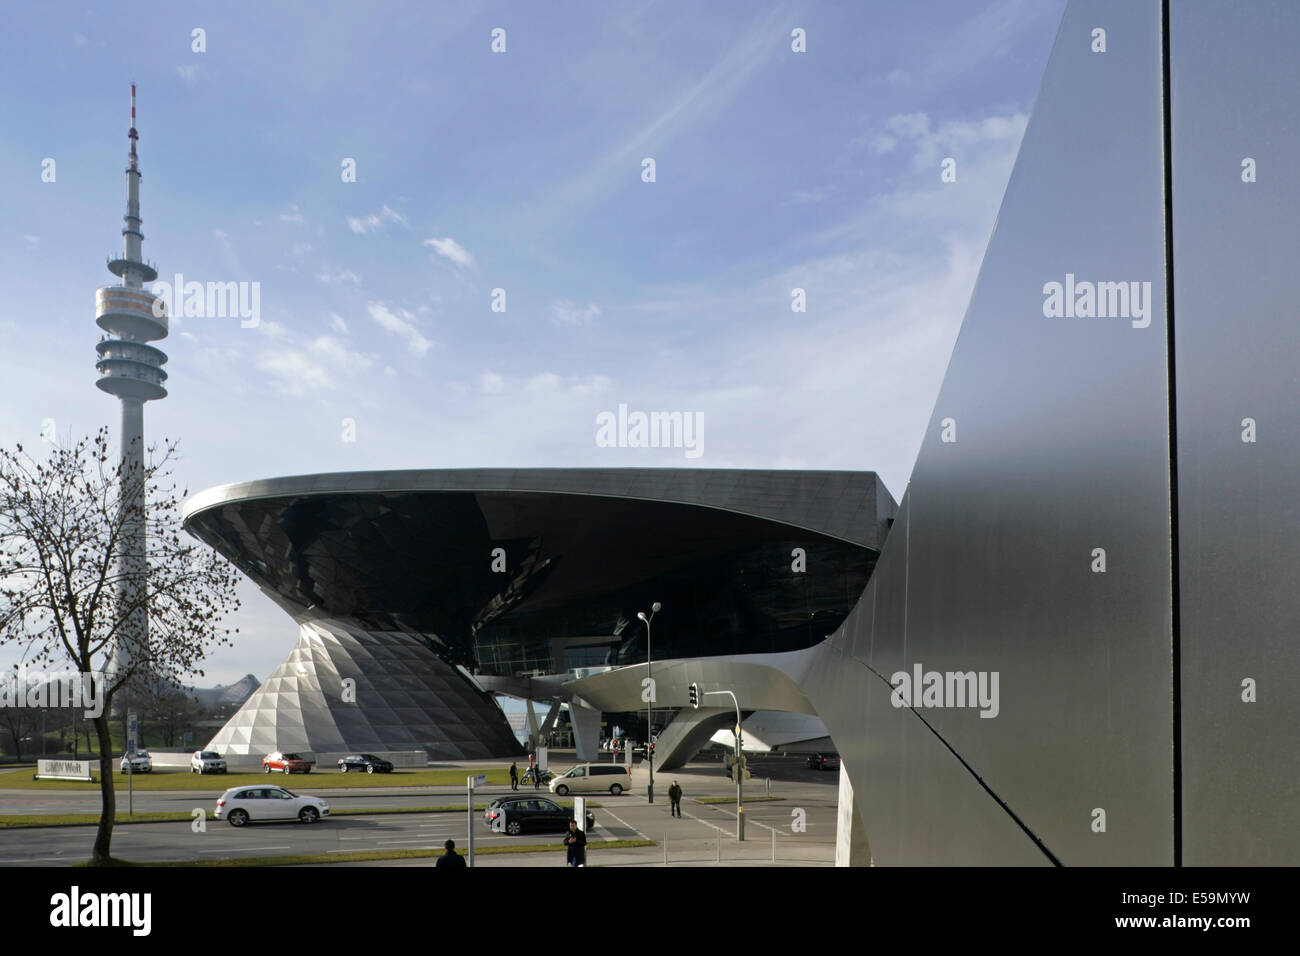 The Olympiaturm or Olympic Tower, Olympiapark, and the BMW-Welt or BMW World, Munich, Germany. Stock Photo